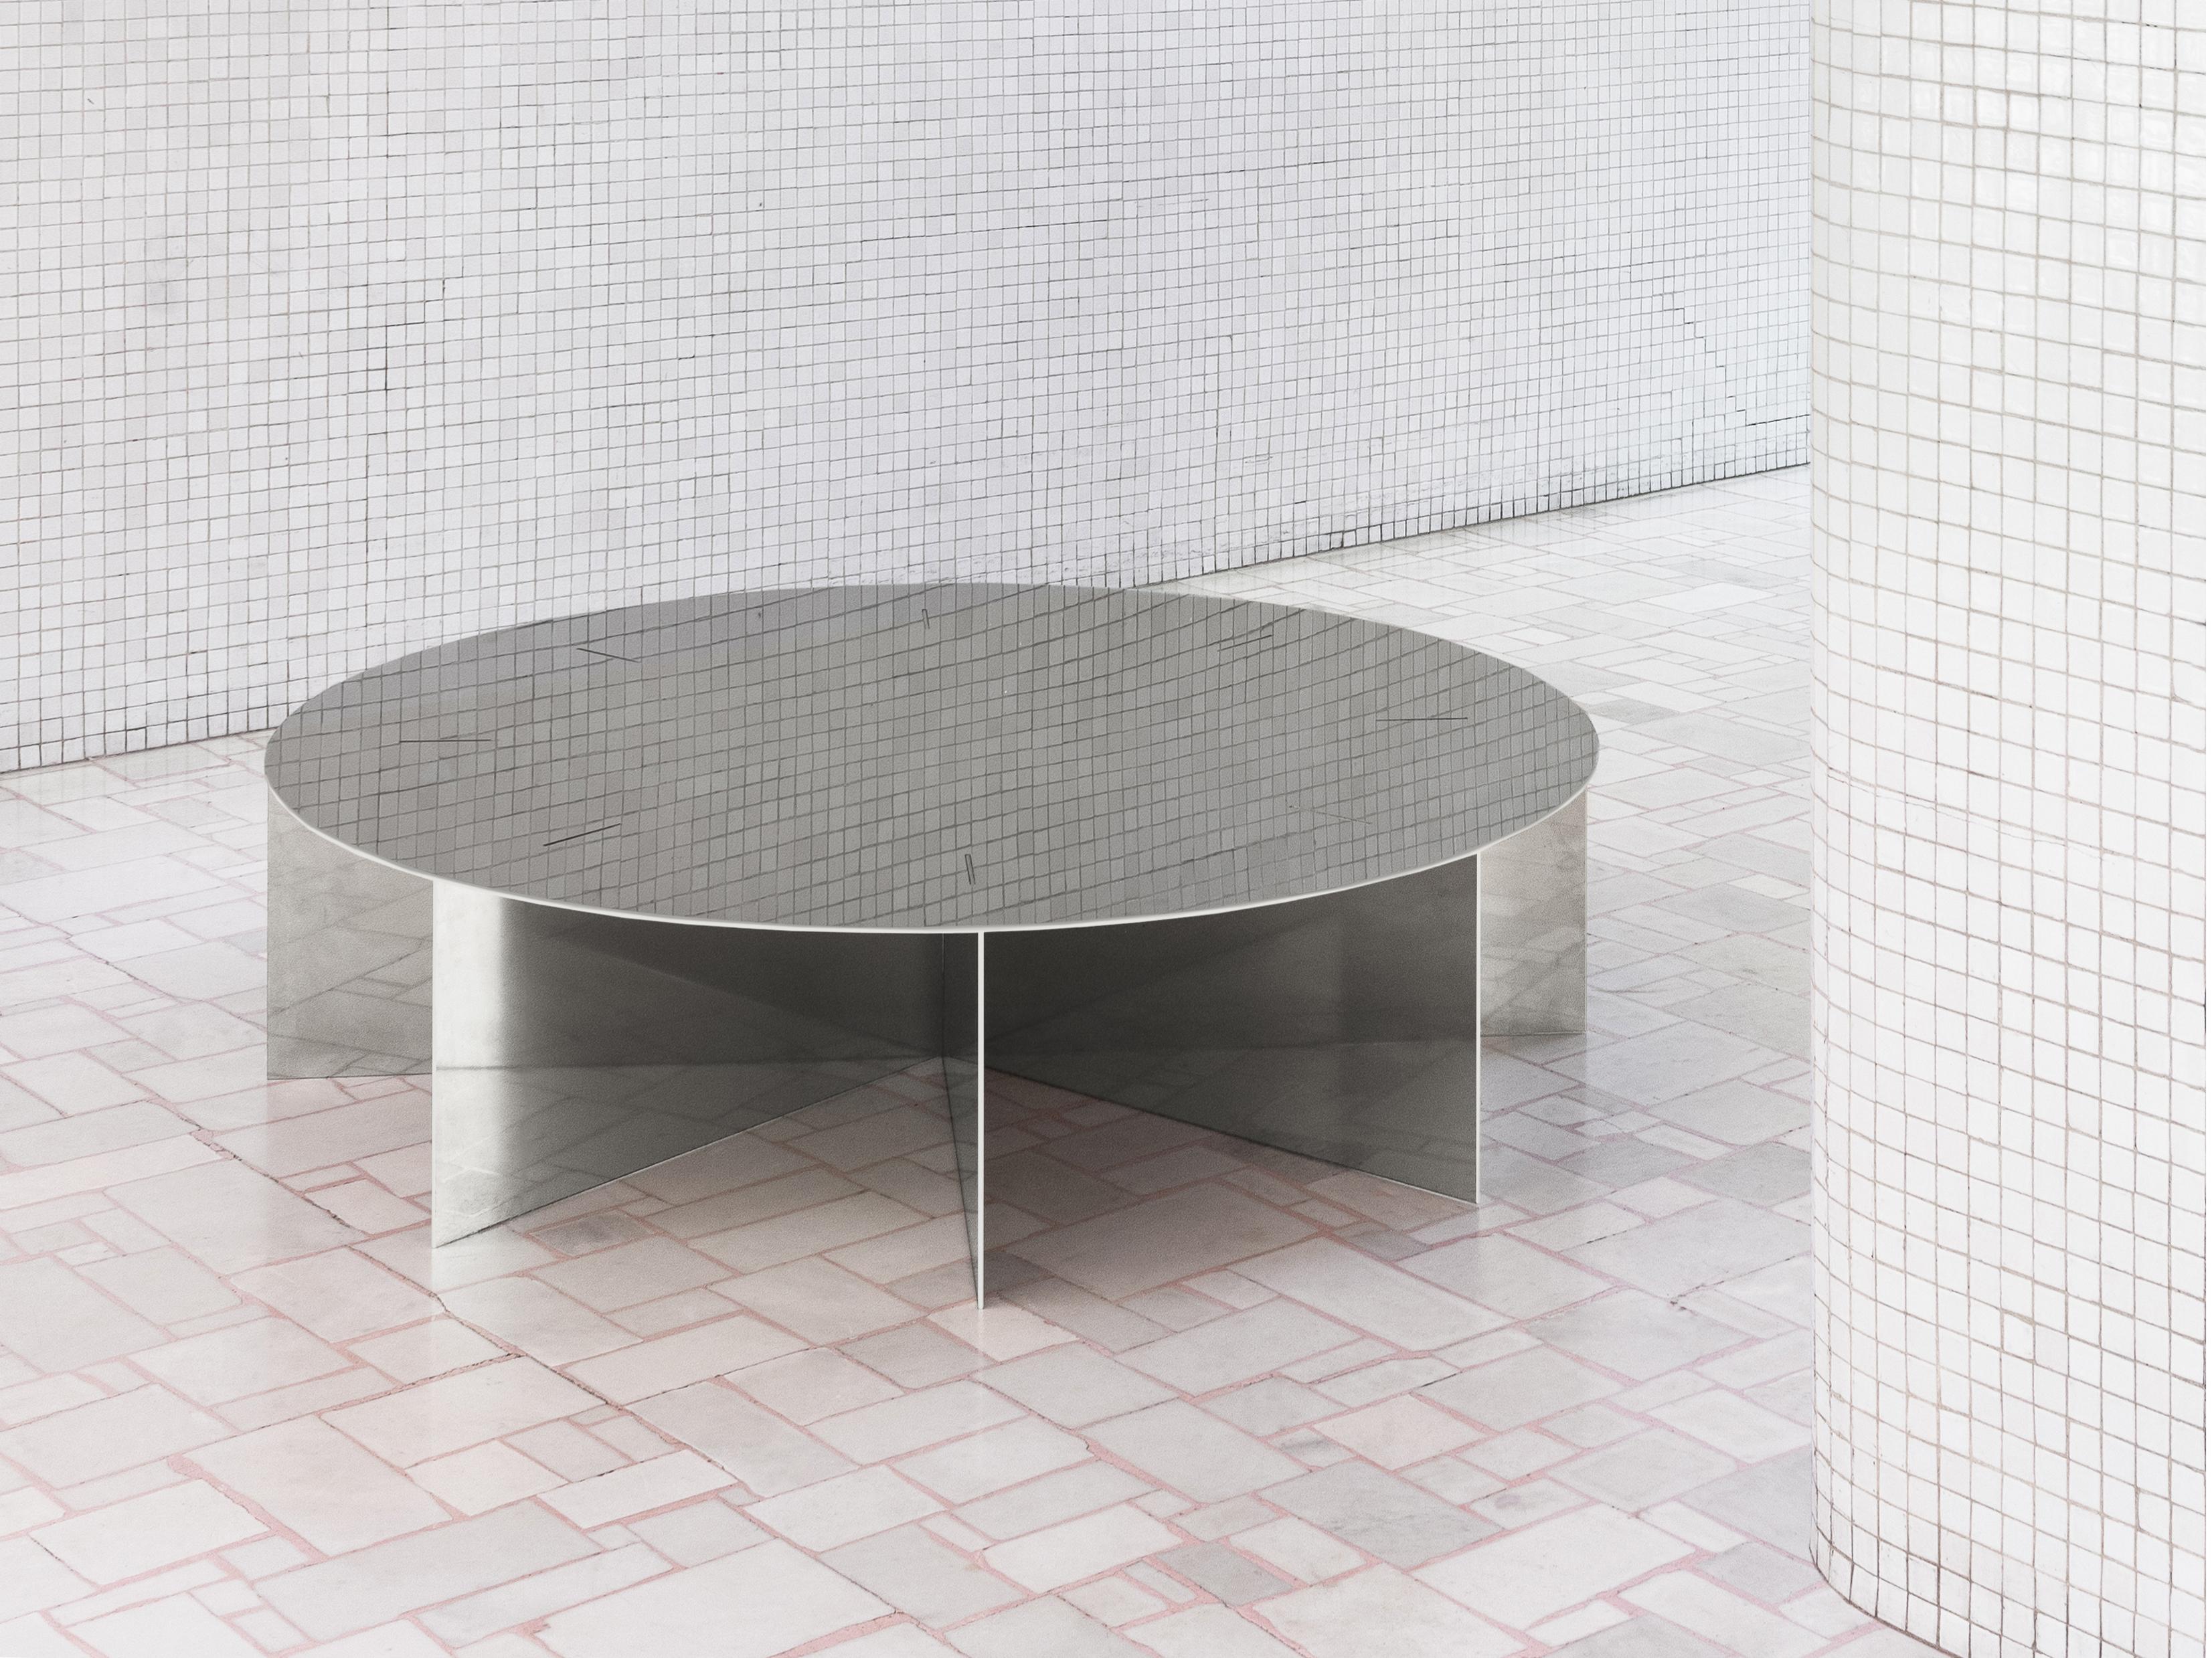 NM02 coffee table is made entirely of high polidshed stainless steel. The object is structured with 3mm thick steel blades interlocked together.
The idea of working with only one material, and therefore only one supplier, is dictated by the desire